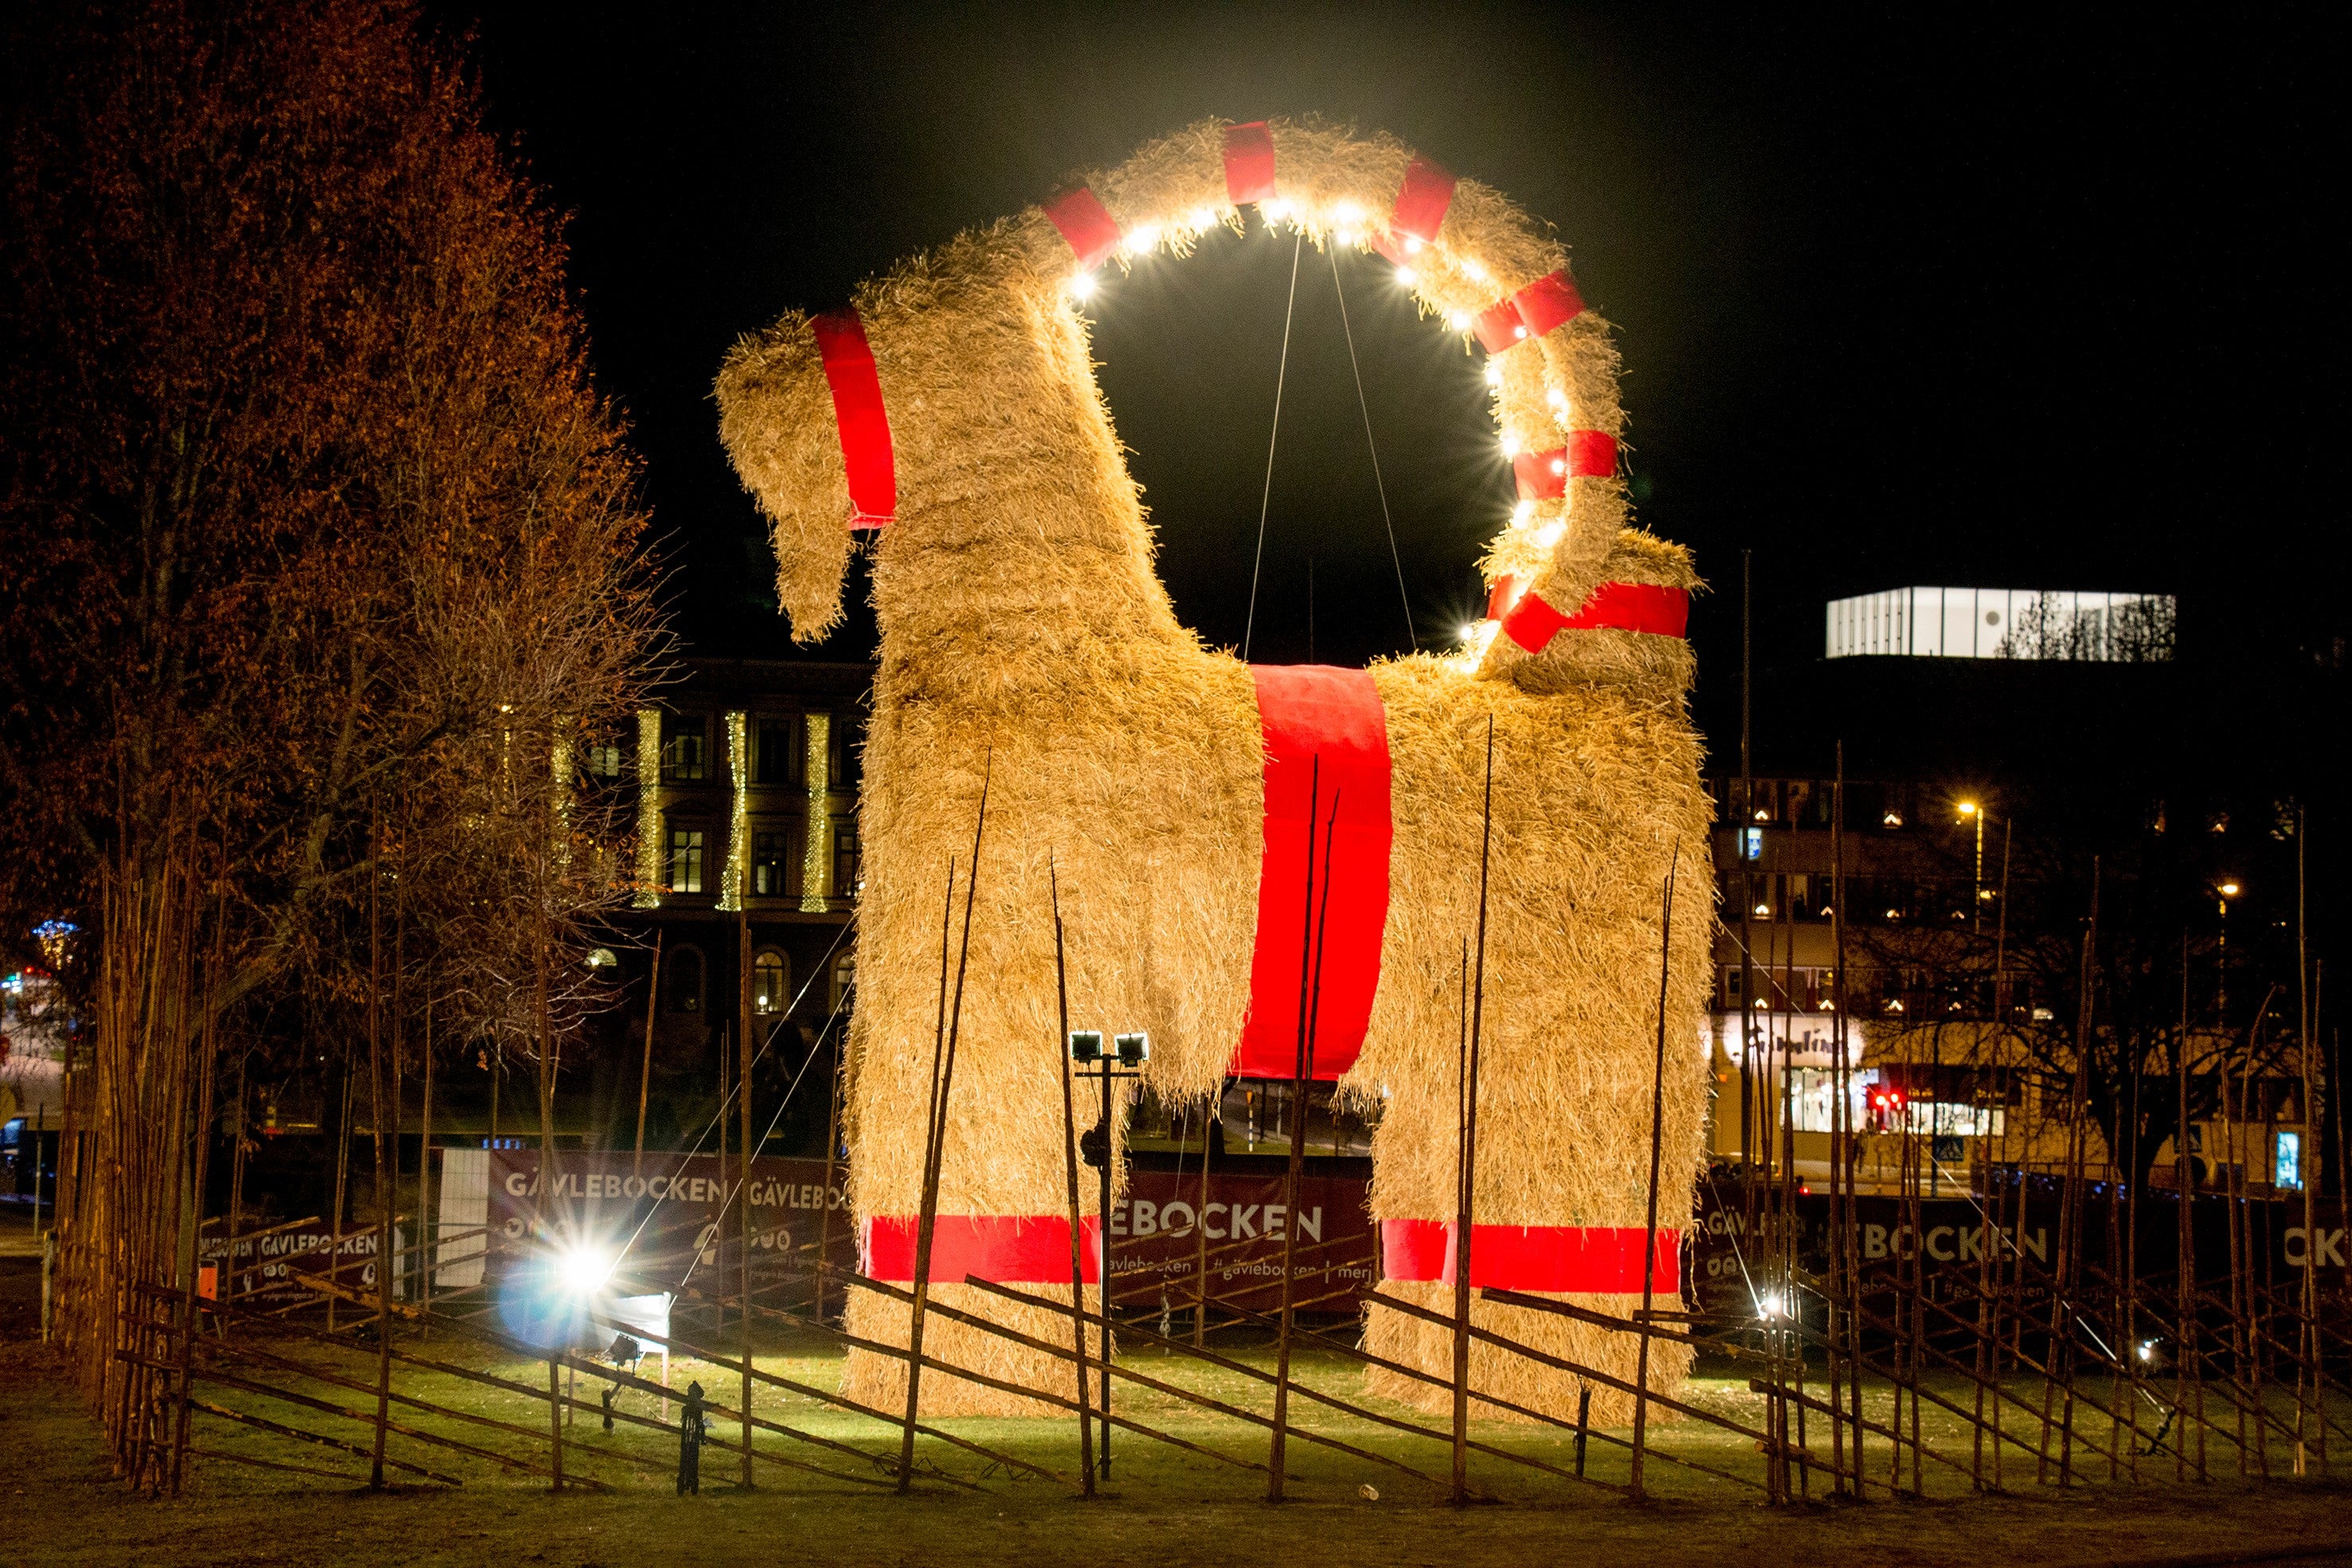 Sweden's straw goat famed for arson attacks has returned – and people are  already wondering if it'll survive | indy100